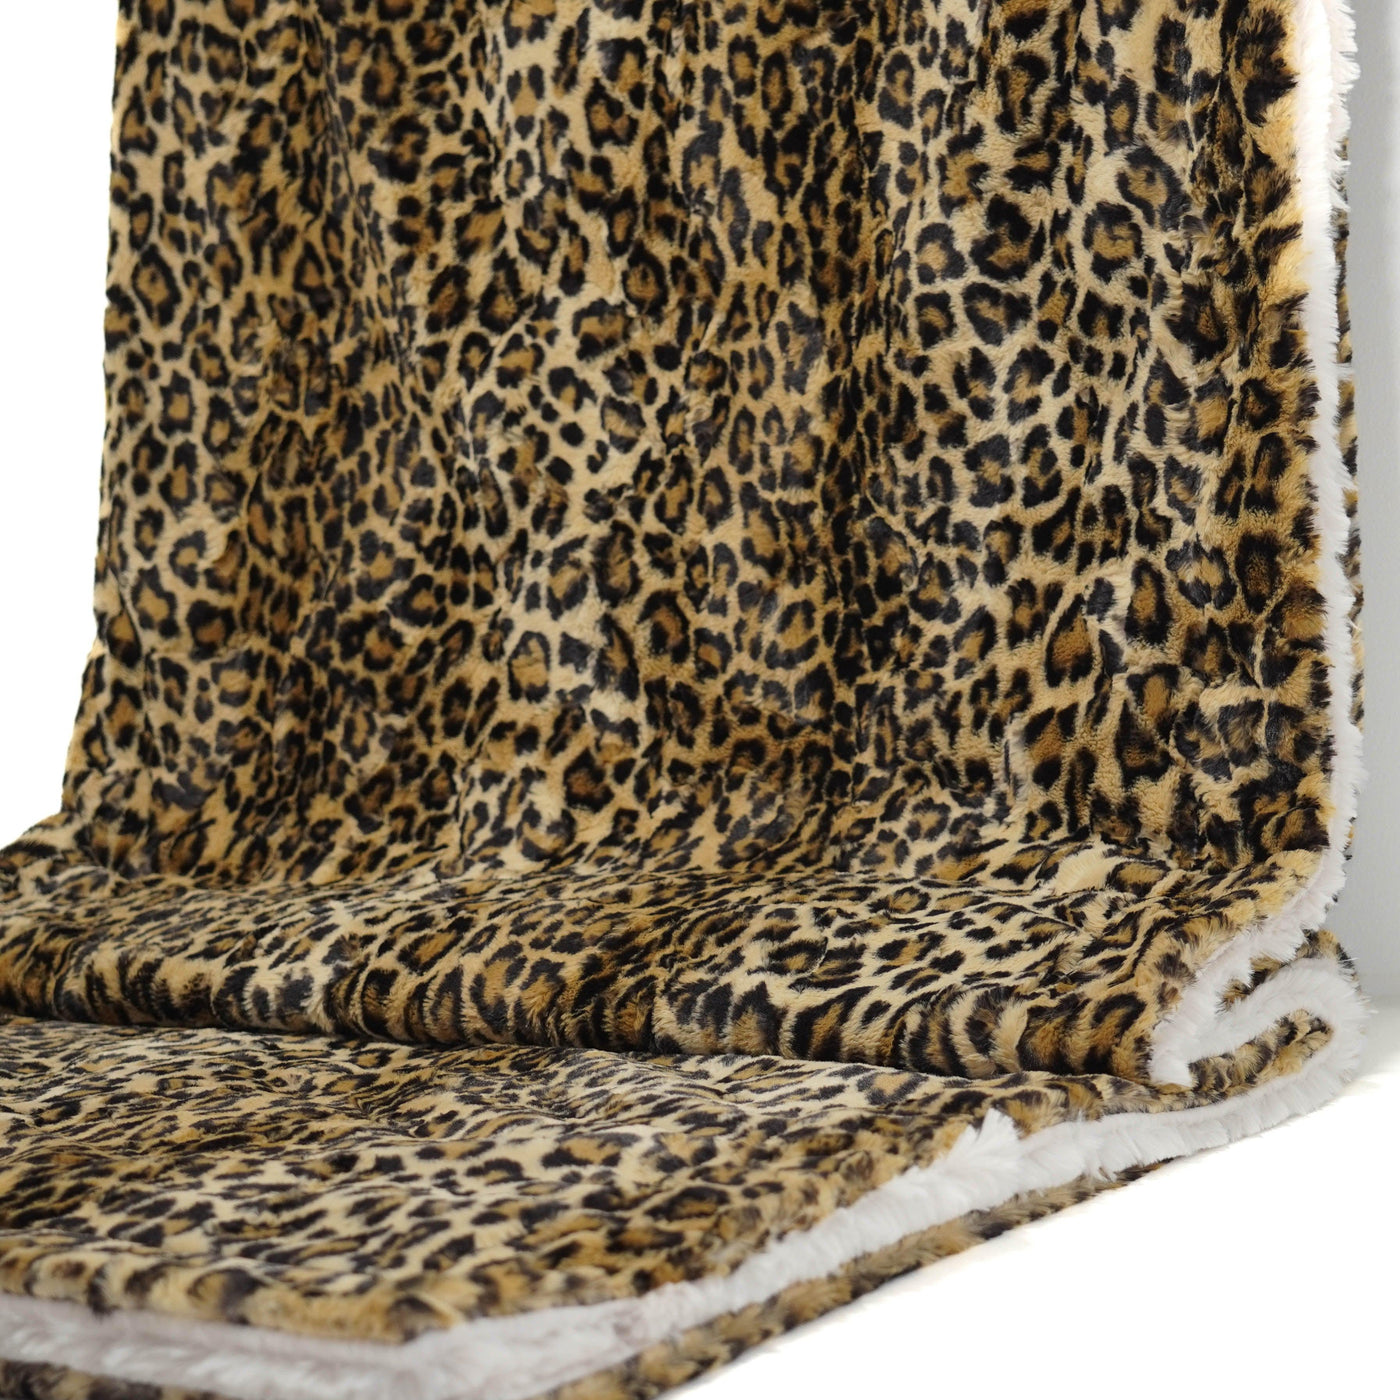 Adult Sized Minky Blanket - Sand Leopard w/ Pearl Bunny-Adult Sized Minky Blanket-Western-Cowhide-Bags-Handmade-Products-Gifts-Dancing Cactus Designs